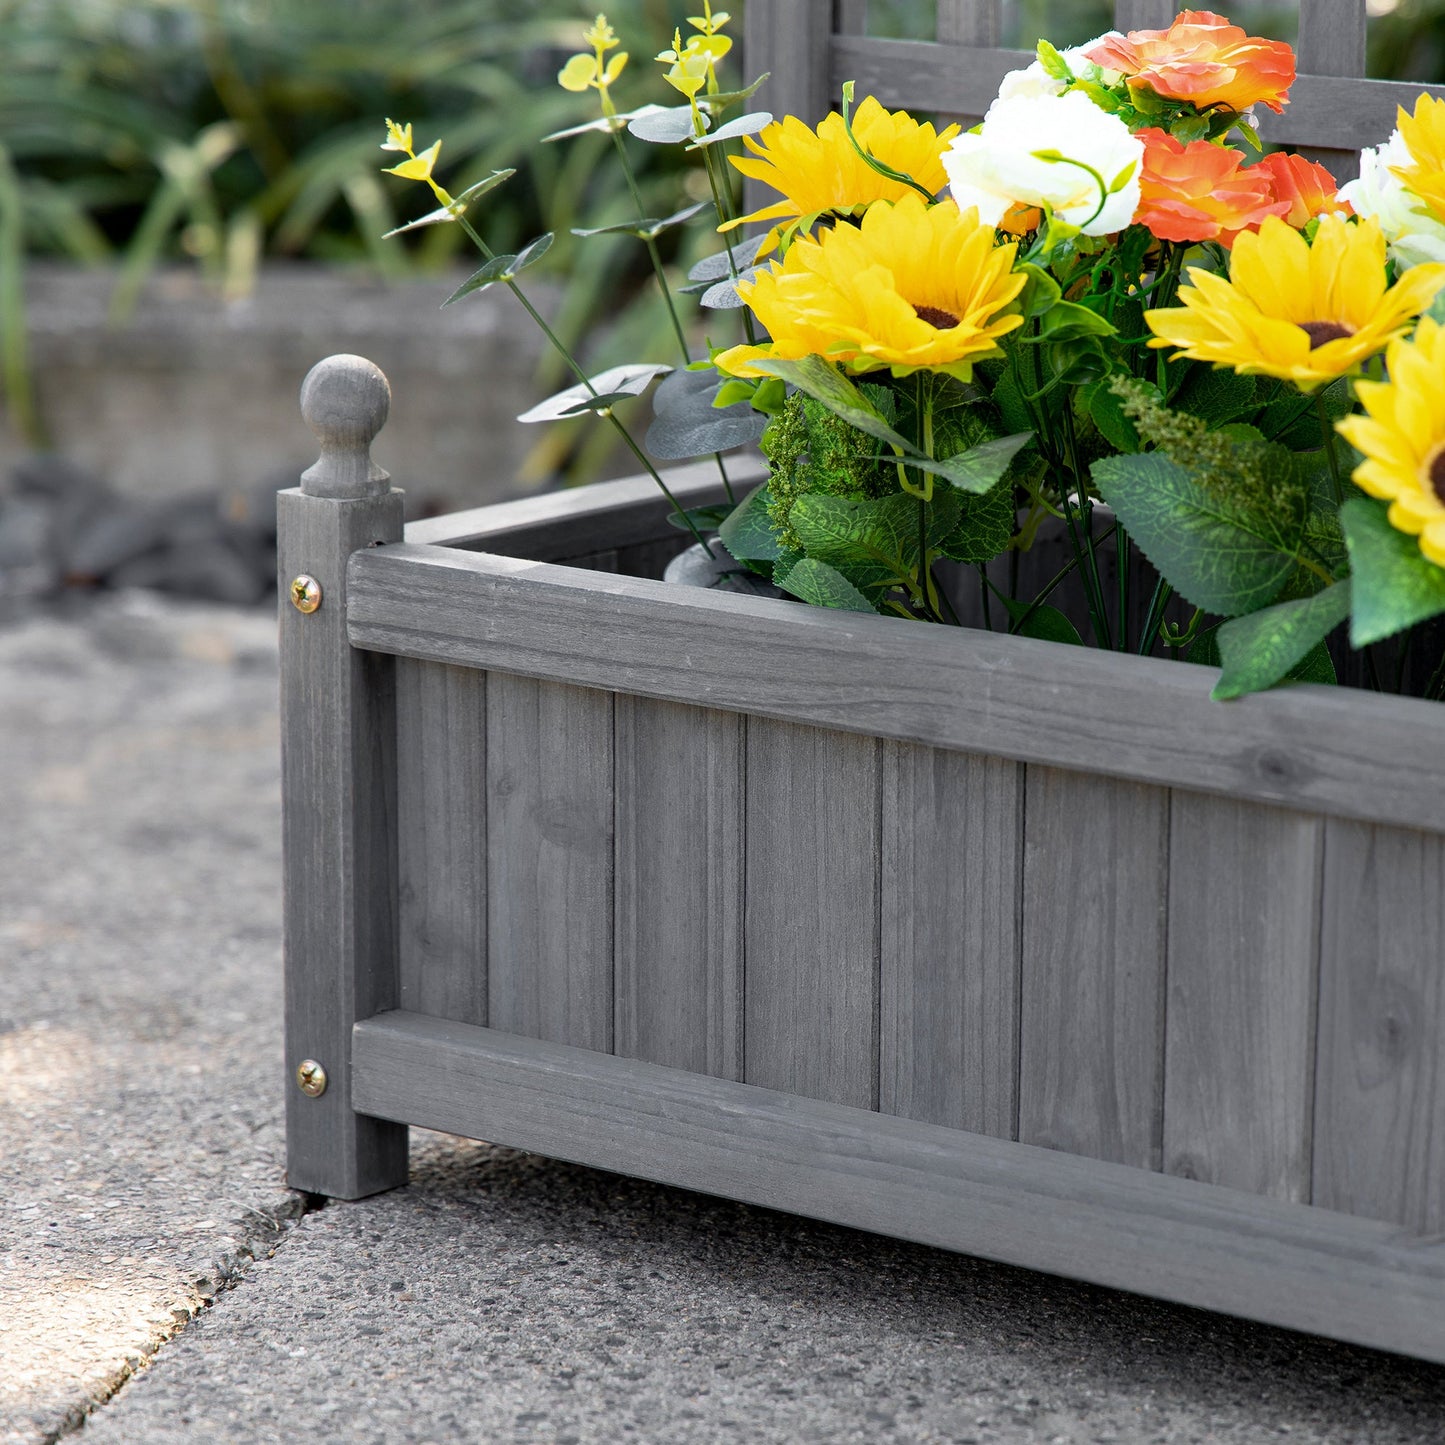 Raised Garden Bed with Trellis for Climbing Vines, Wood Planter Box for Garden, Free Standing Flower Bed, Indoor Outdoor Display Rack, 25.2" x 11" x 47.2", Grey at Gallery Canada